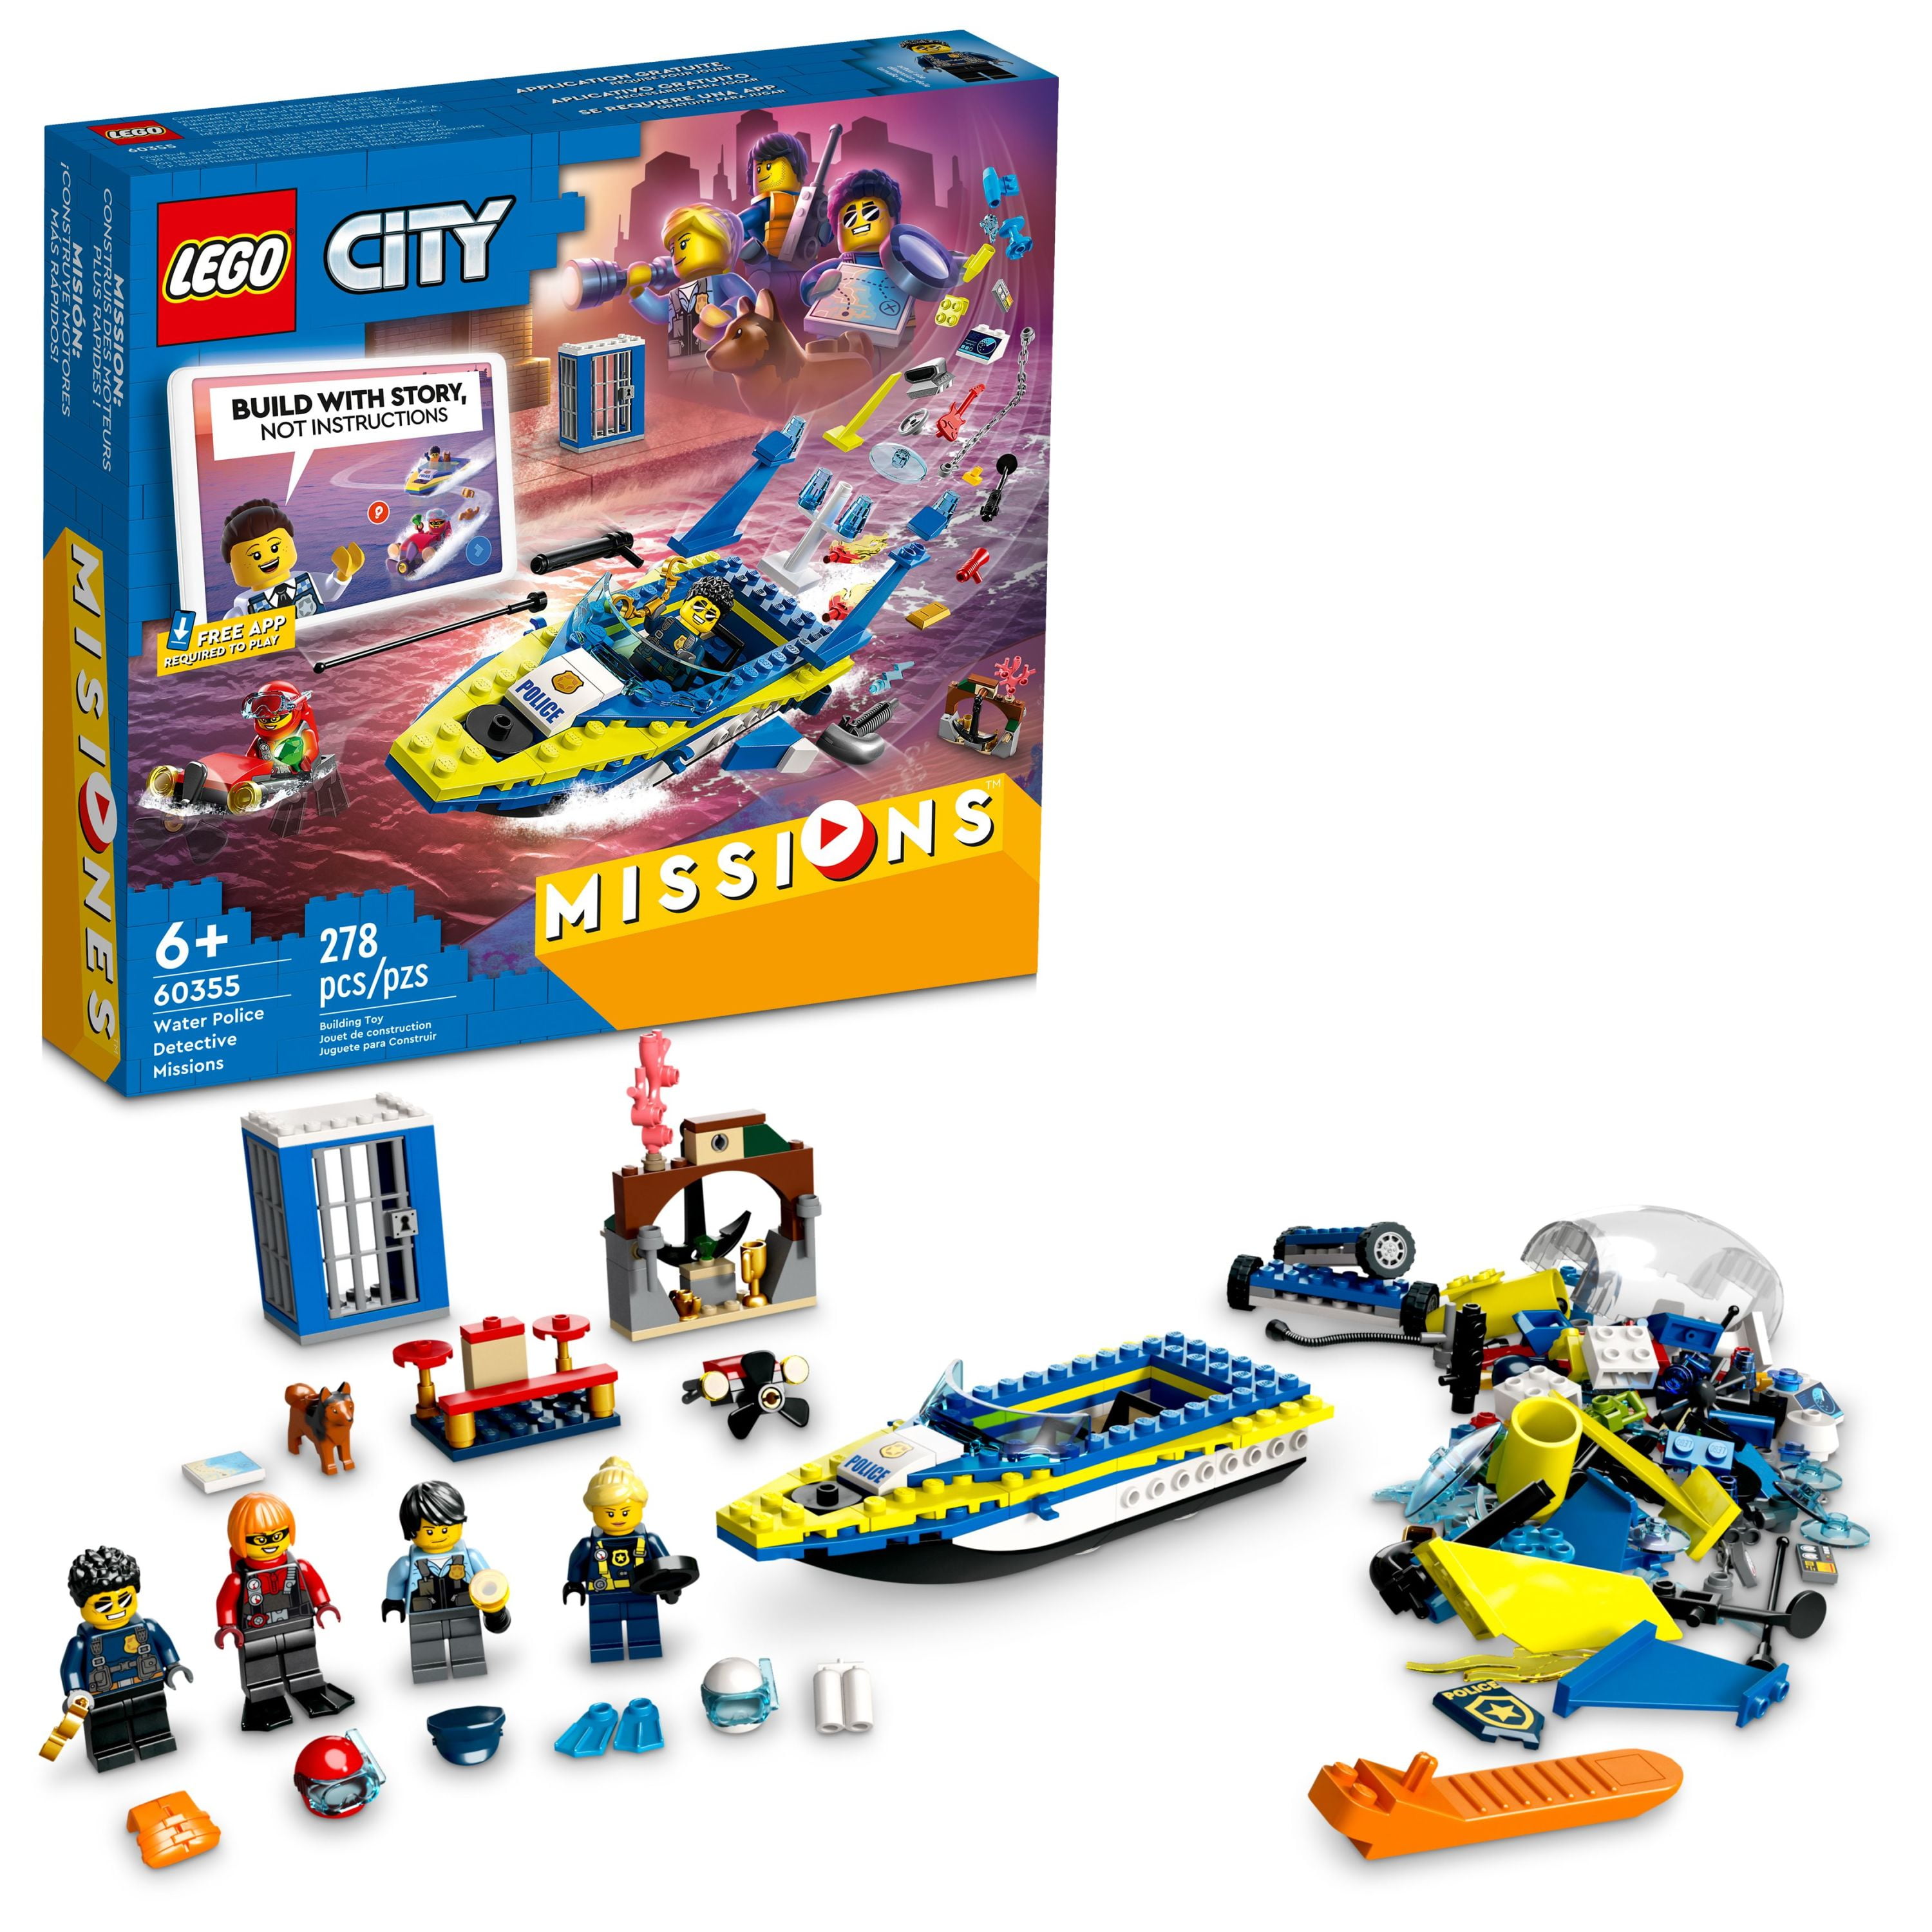 LEGO City Water Police Detective Missions, 60355 with Speed Boat Toy, Interactive Digital Adventure Building Game Playset with Bricks and 4 Minifigures